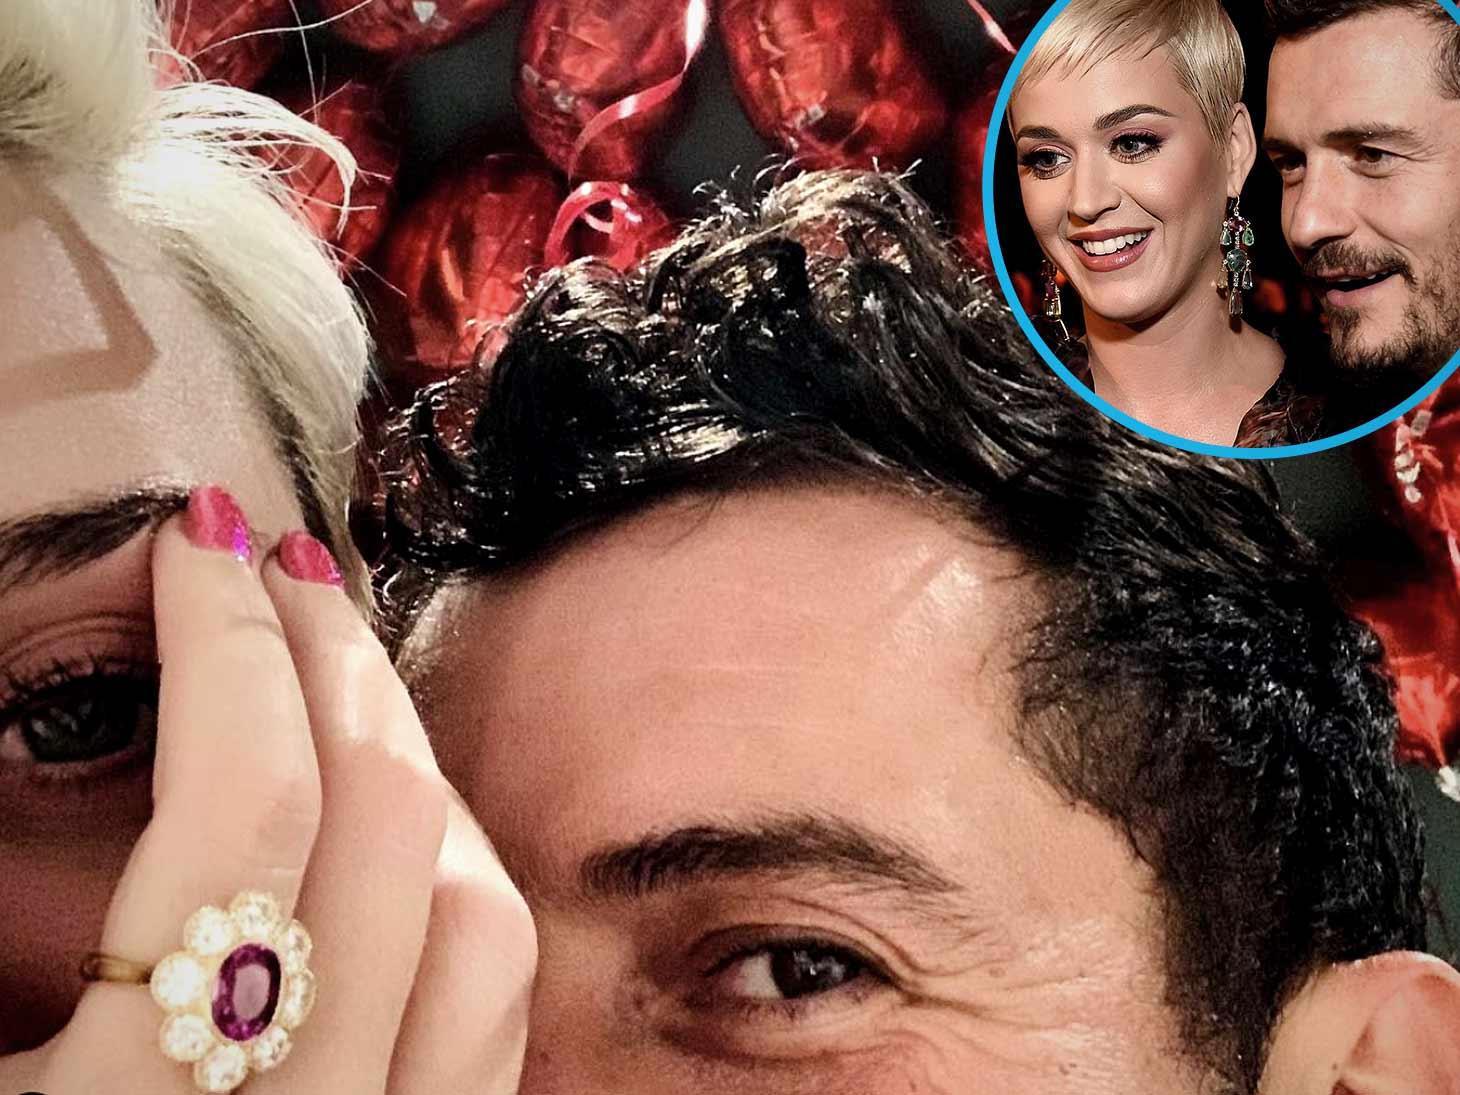 Katy Perry and Orlando Bloom Get Engaged on Valentine’s Day